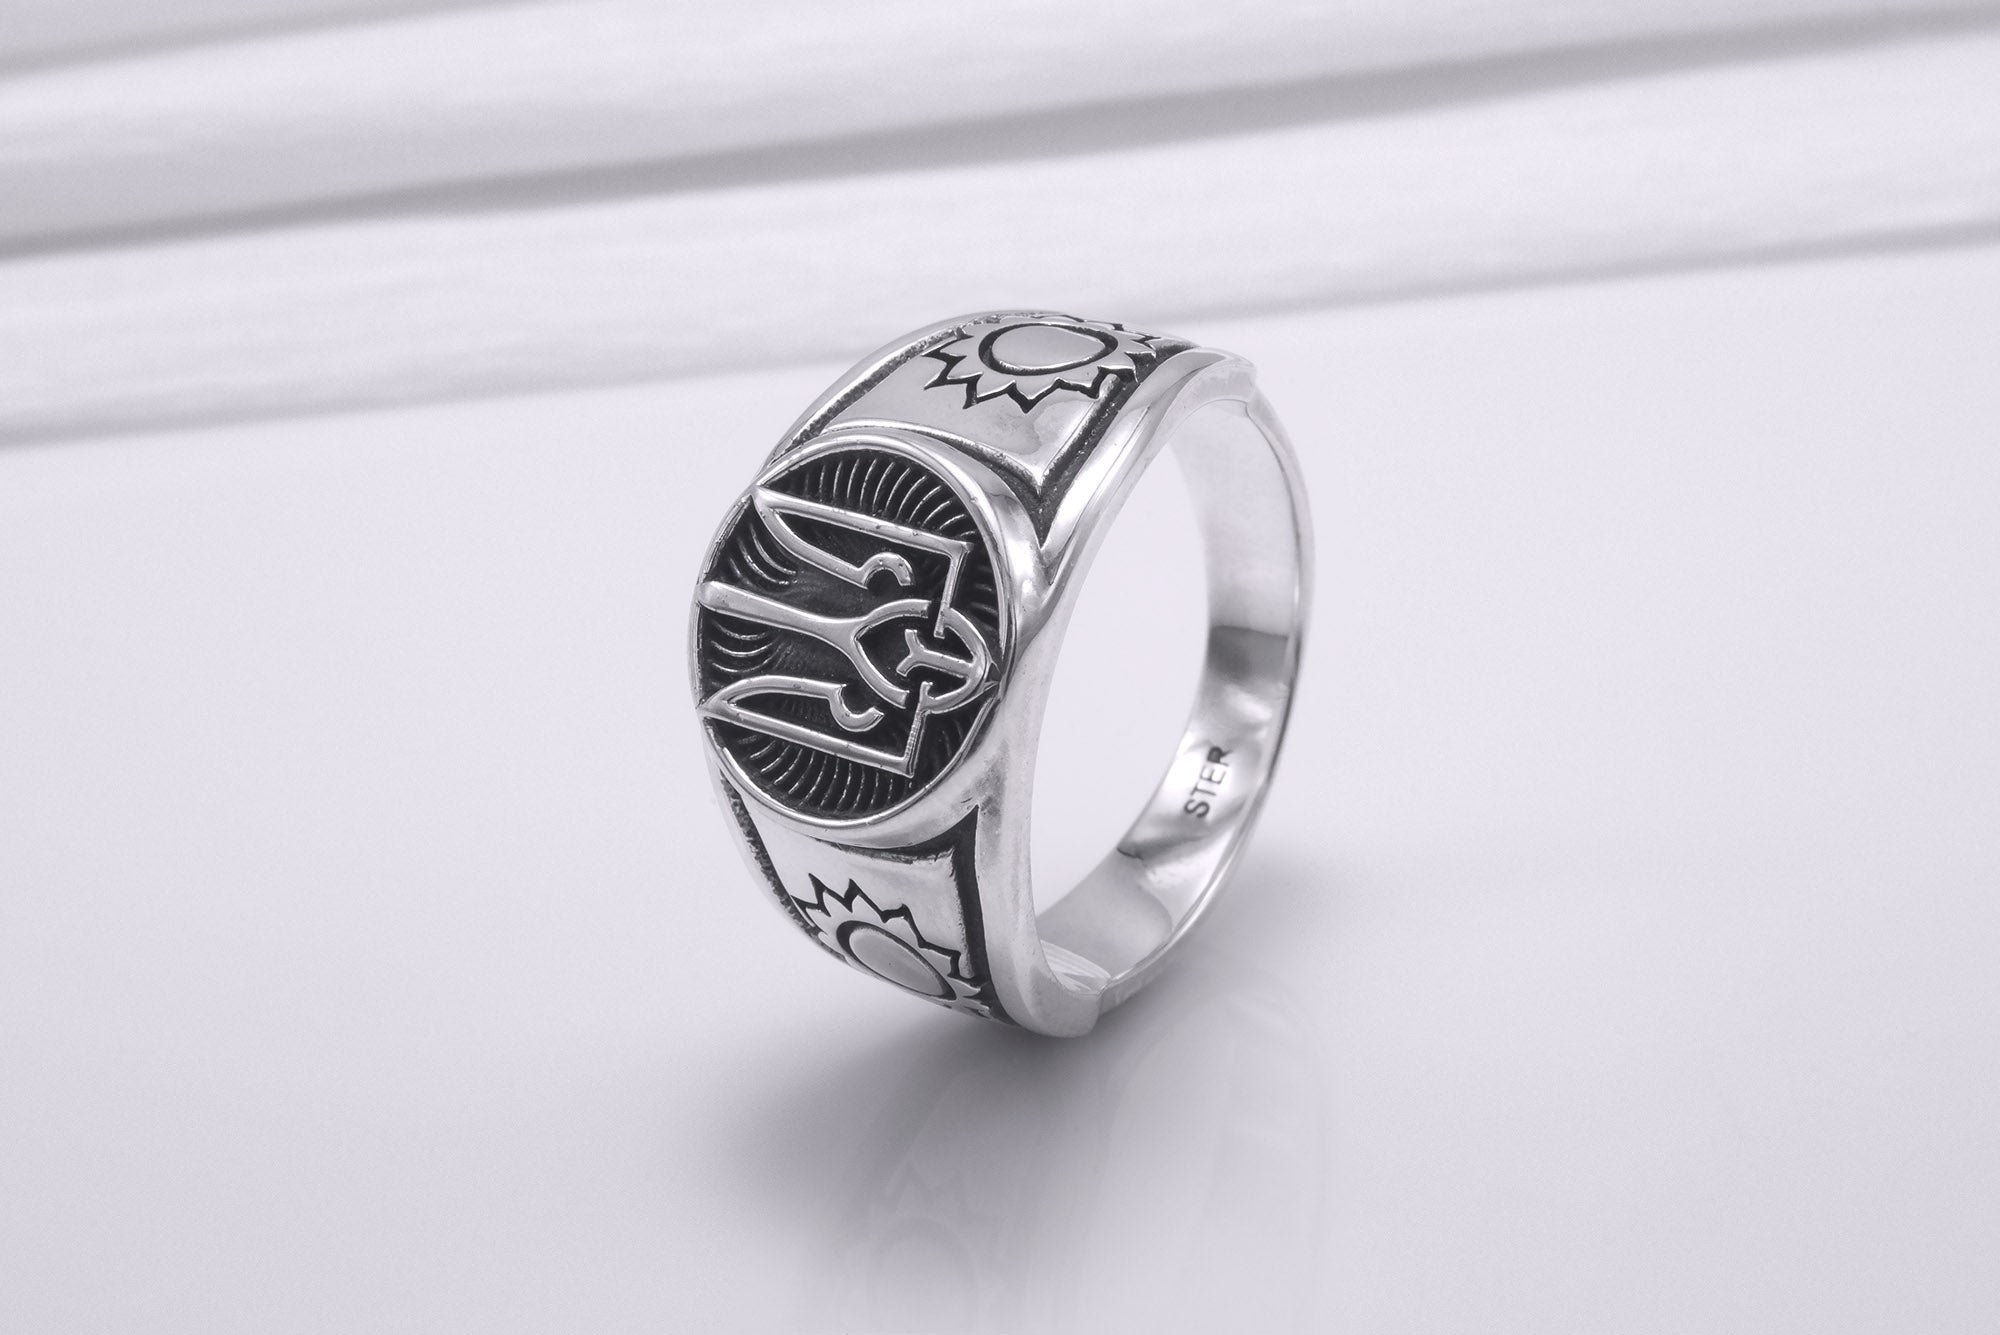 Sterling Silver Ukrainian Trident Ring with Sunflowers, Made in Ukraine Jewelry